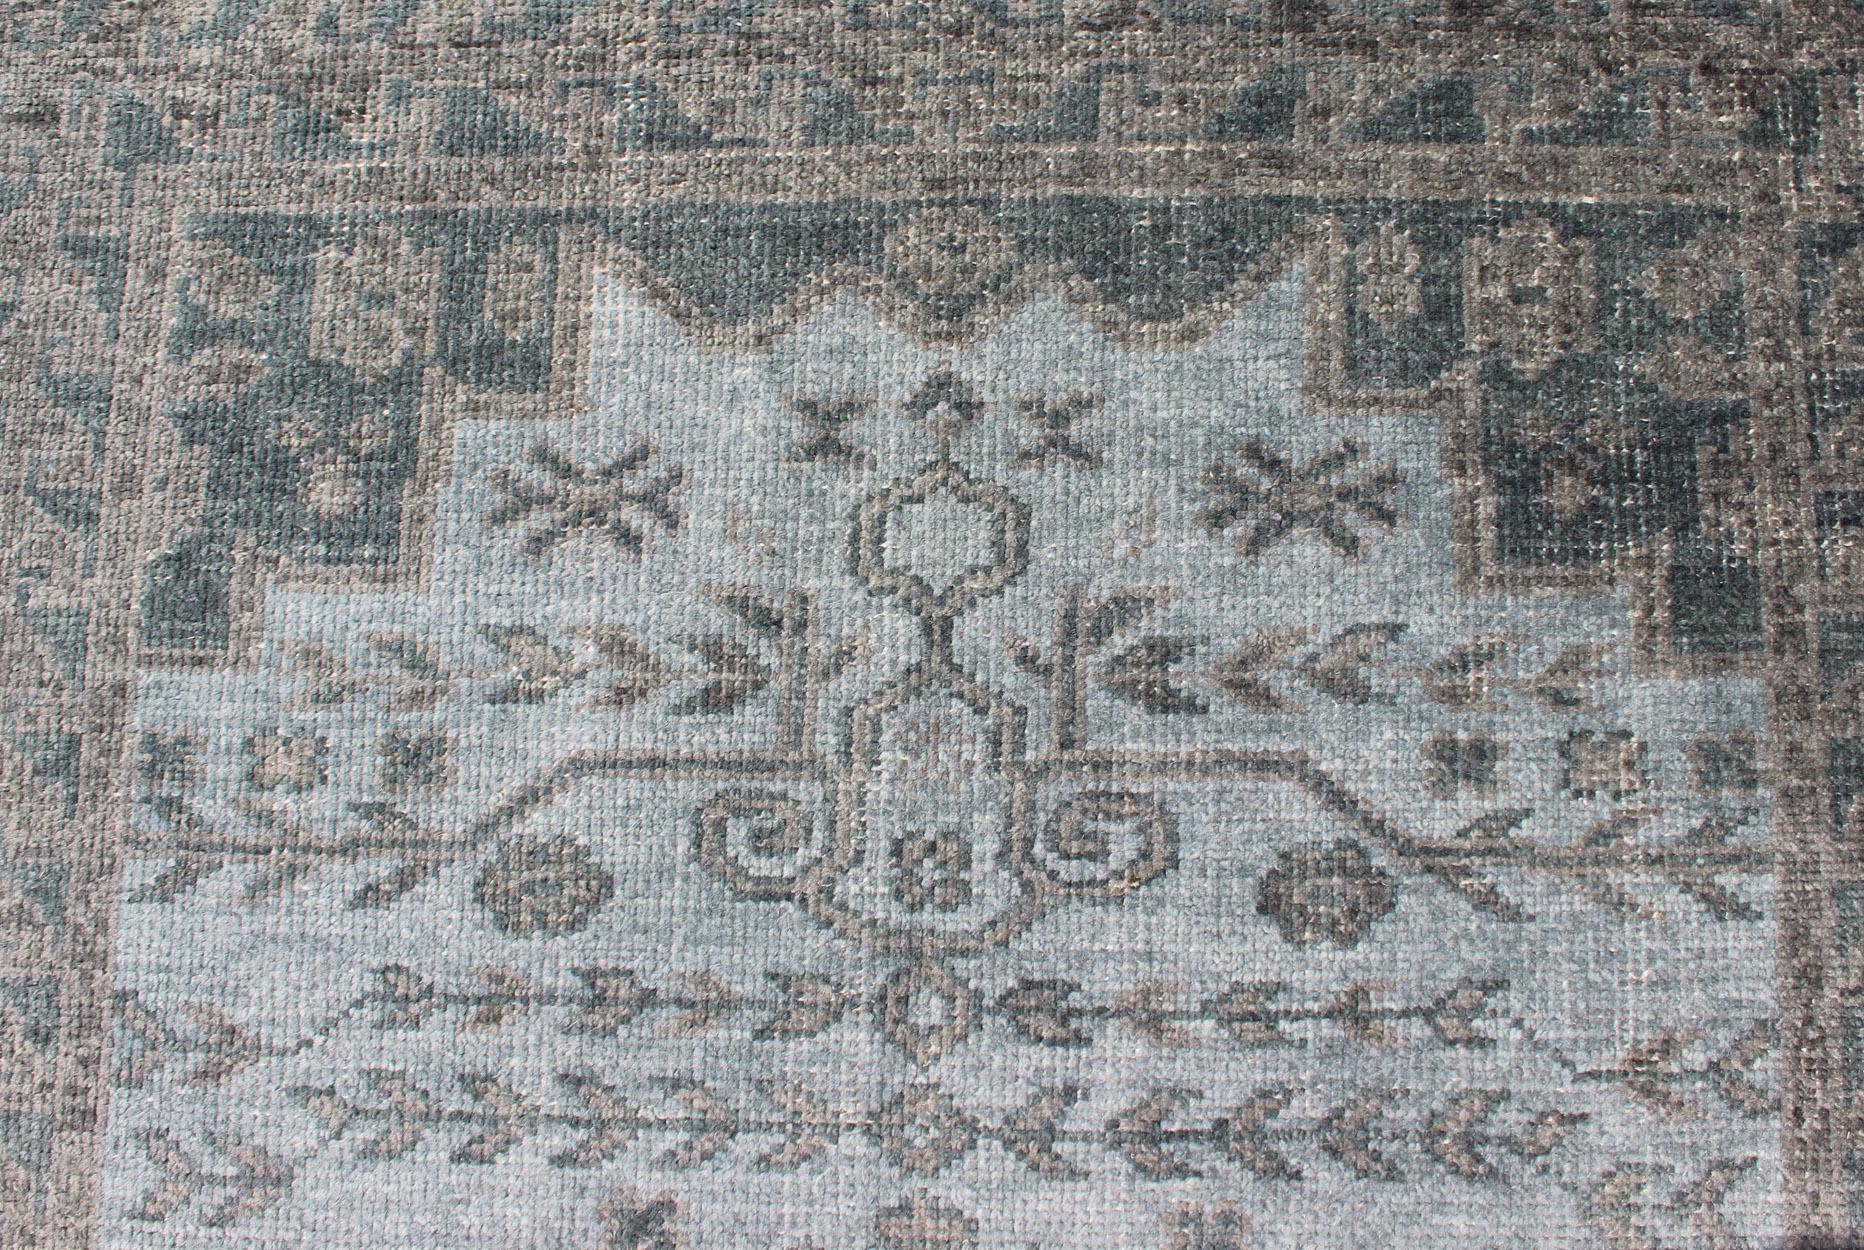 Oushak Design Distressed Rug in Gray, Taupe, & Cream with large Medallion Design 2